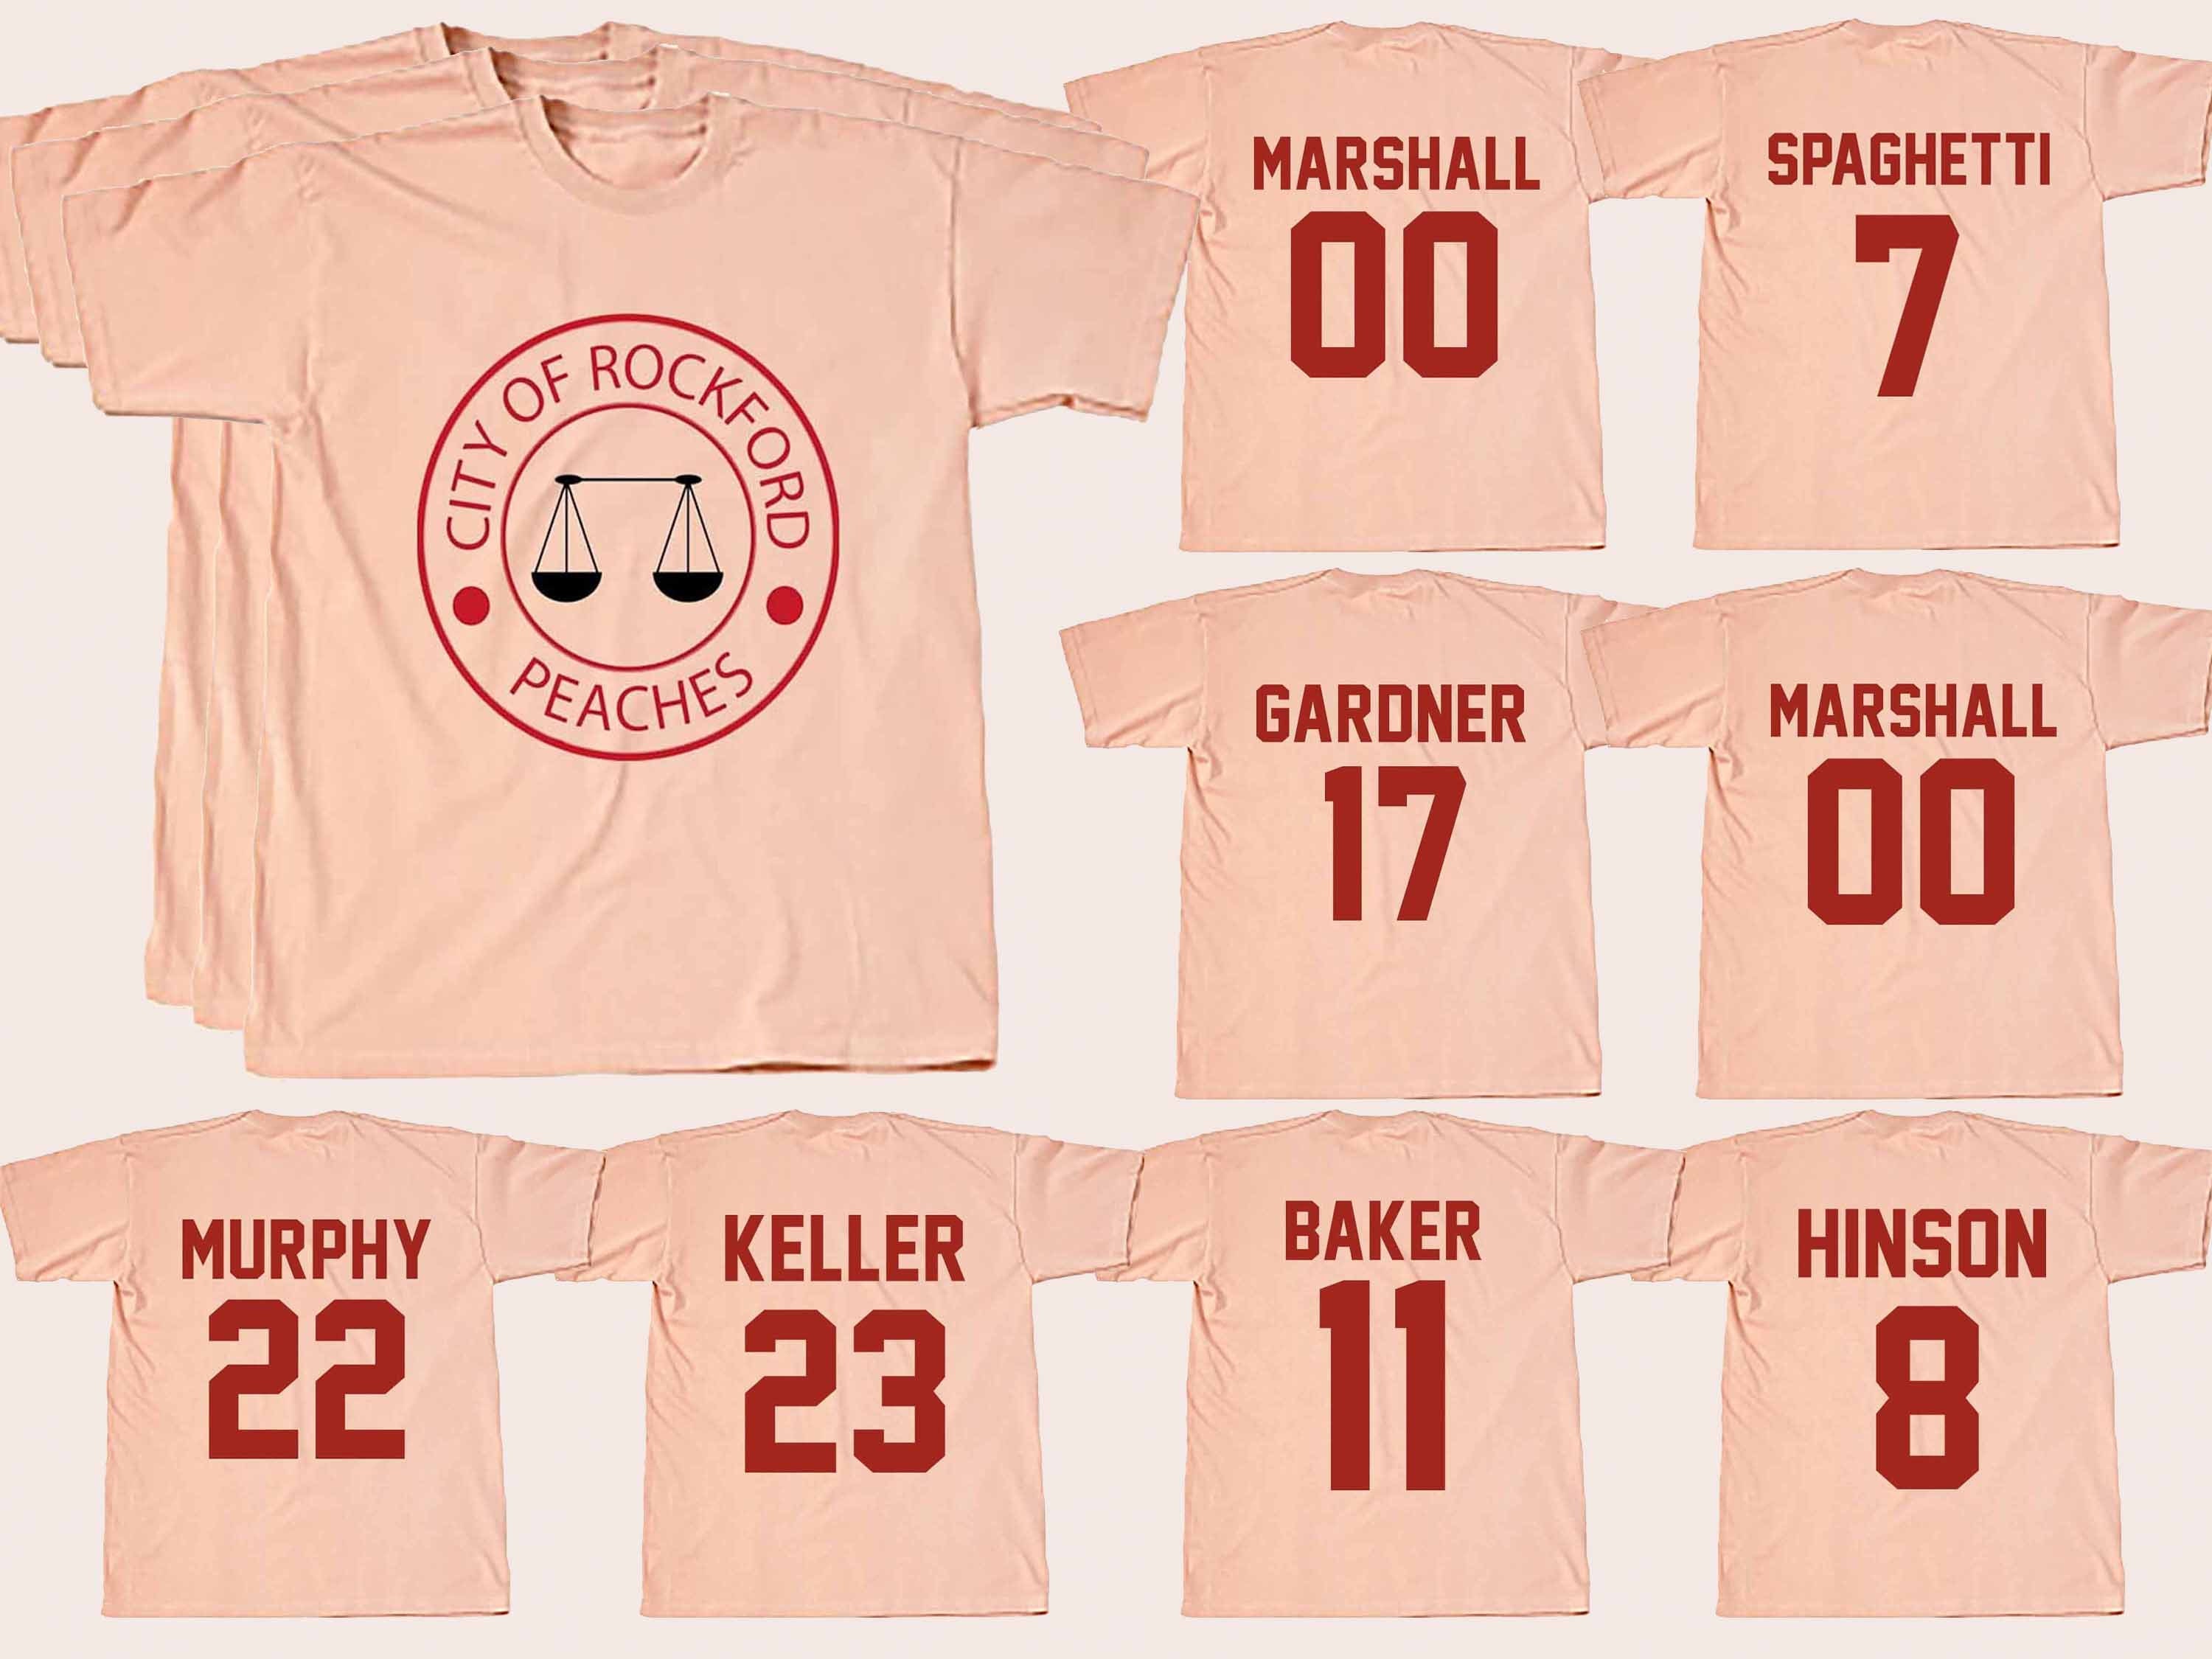 Rockford Peaches Jersey A League of Their Own Shirt Front 